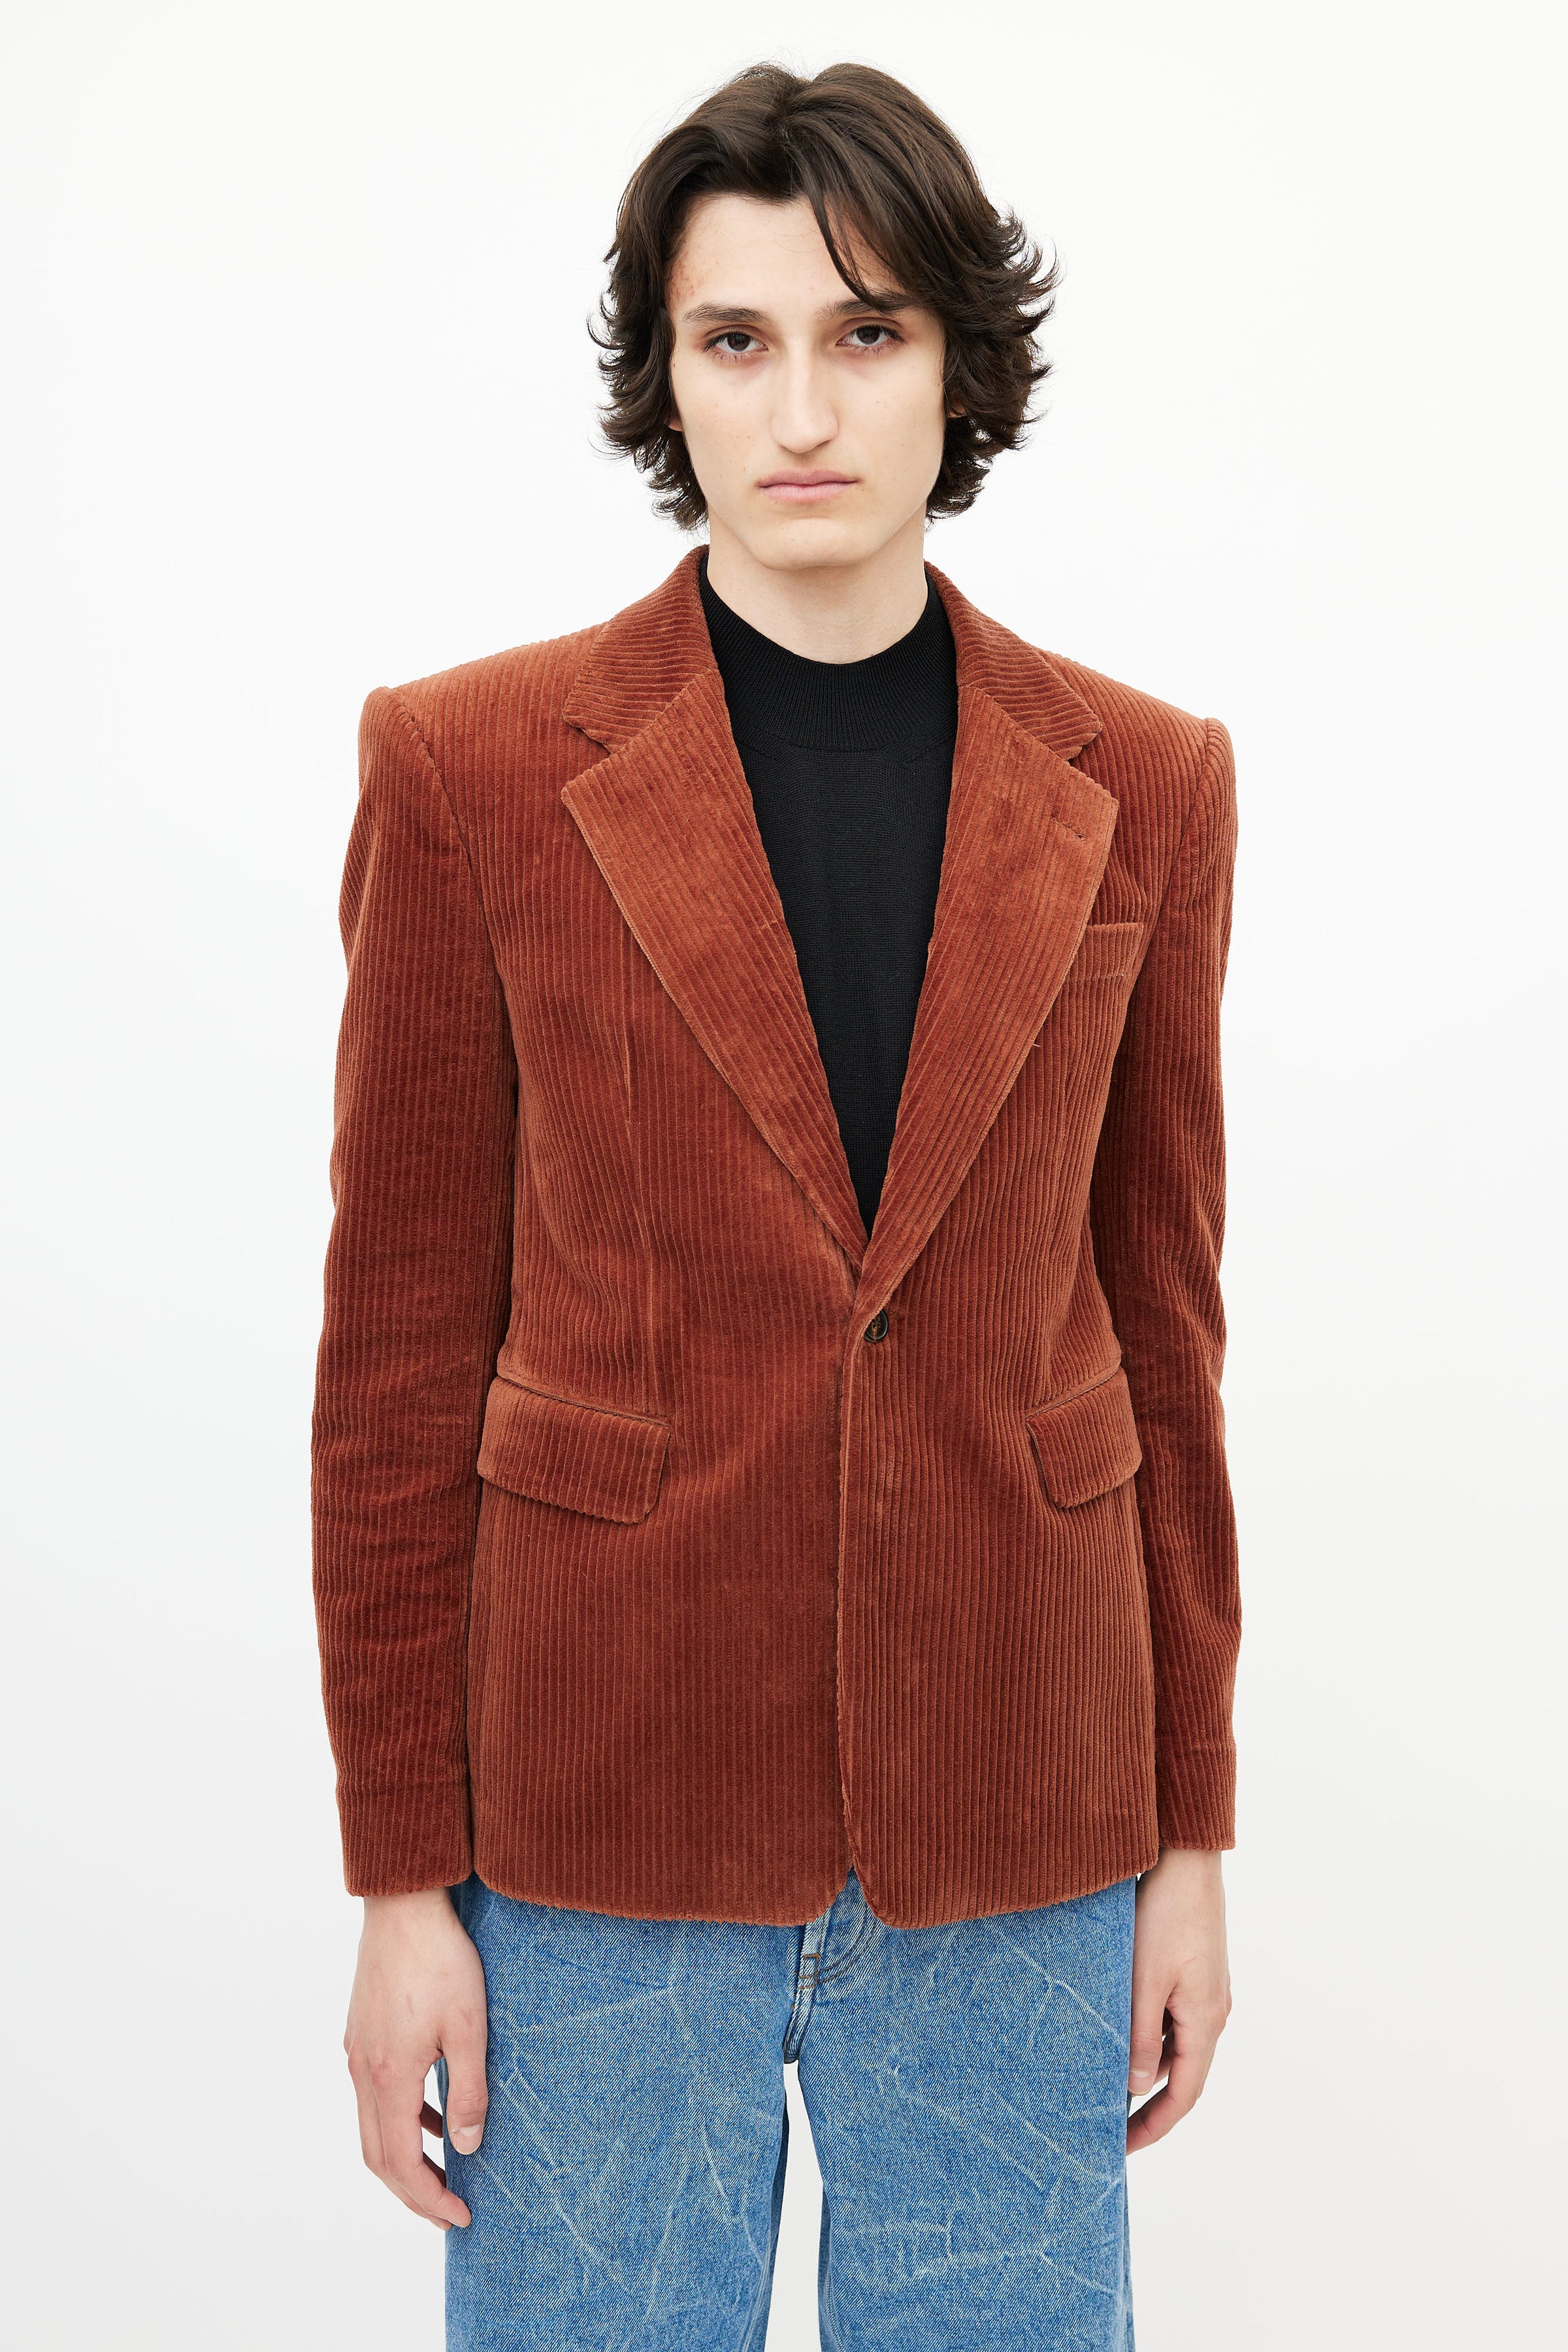 10 Best Corduroy Jackets for Men of 2023 | HiConsumption